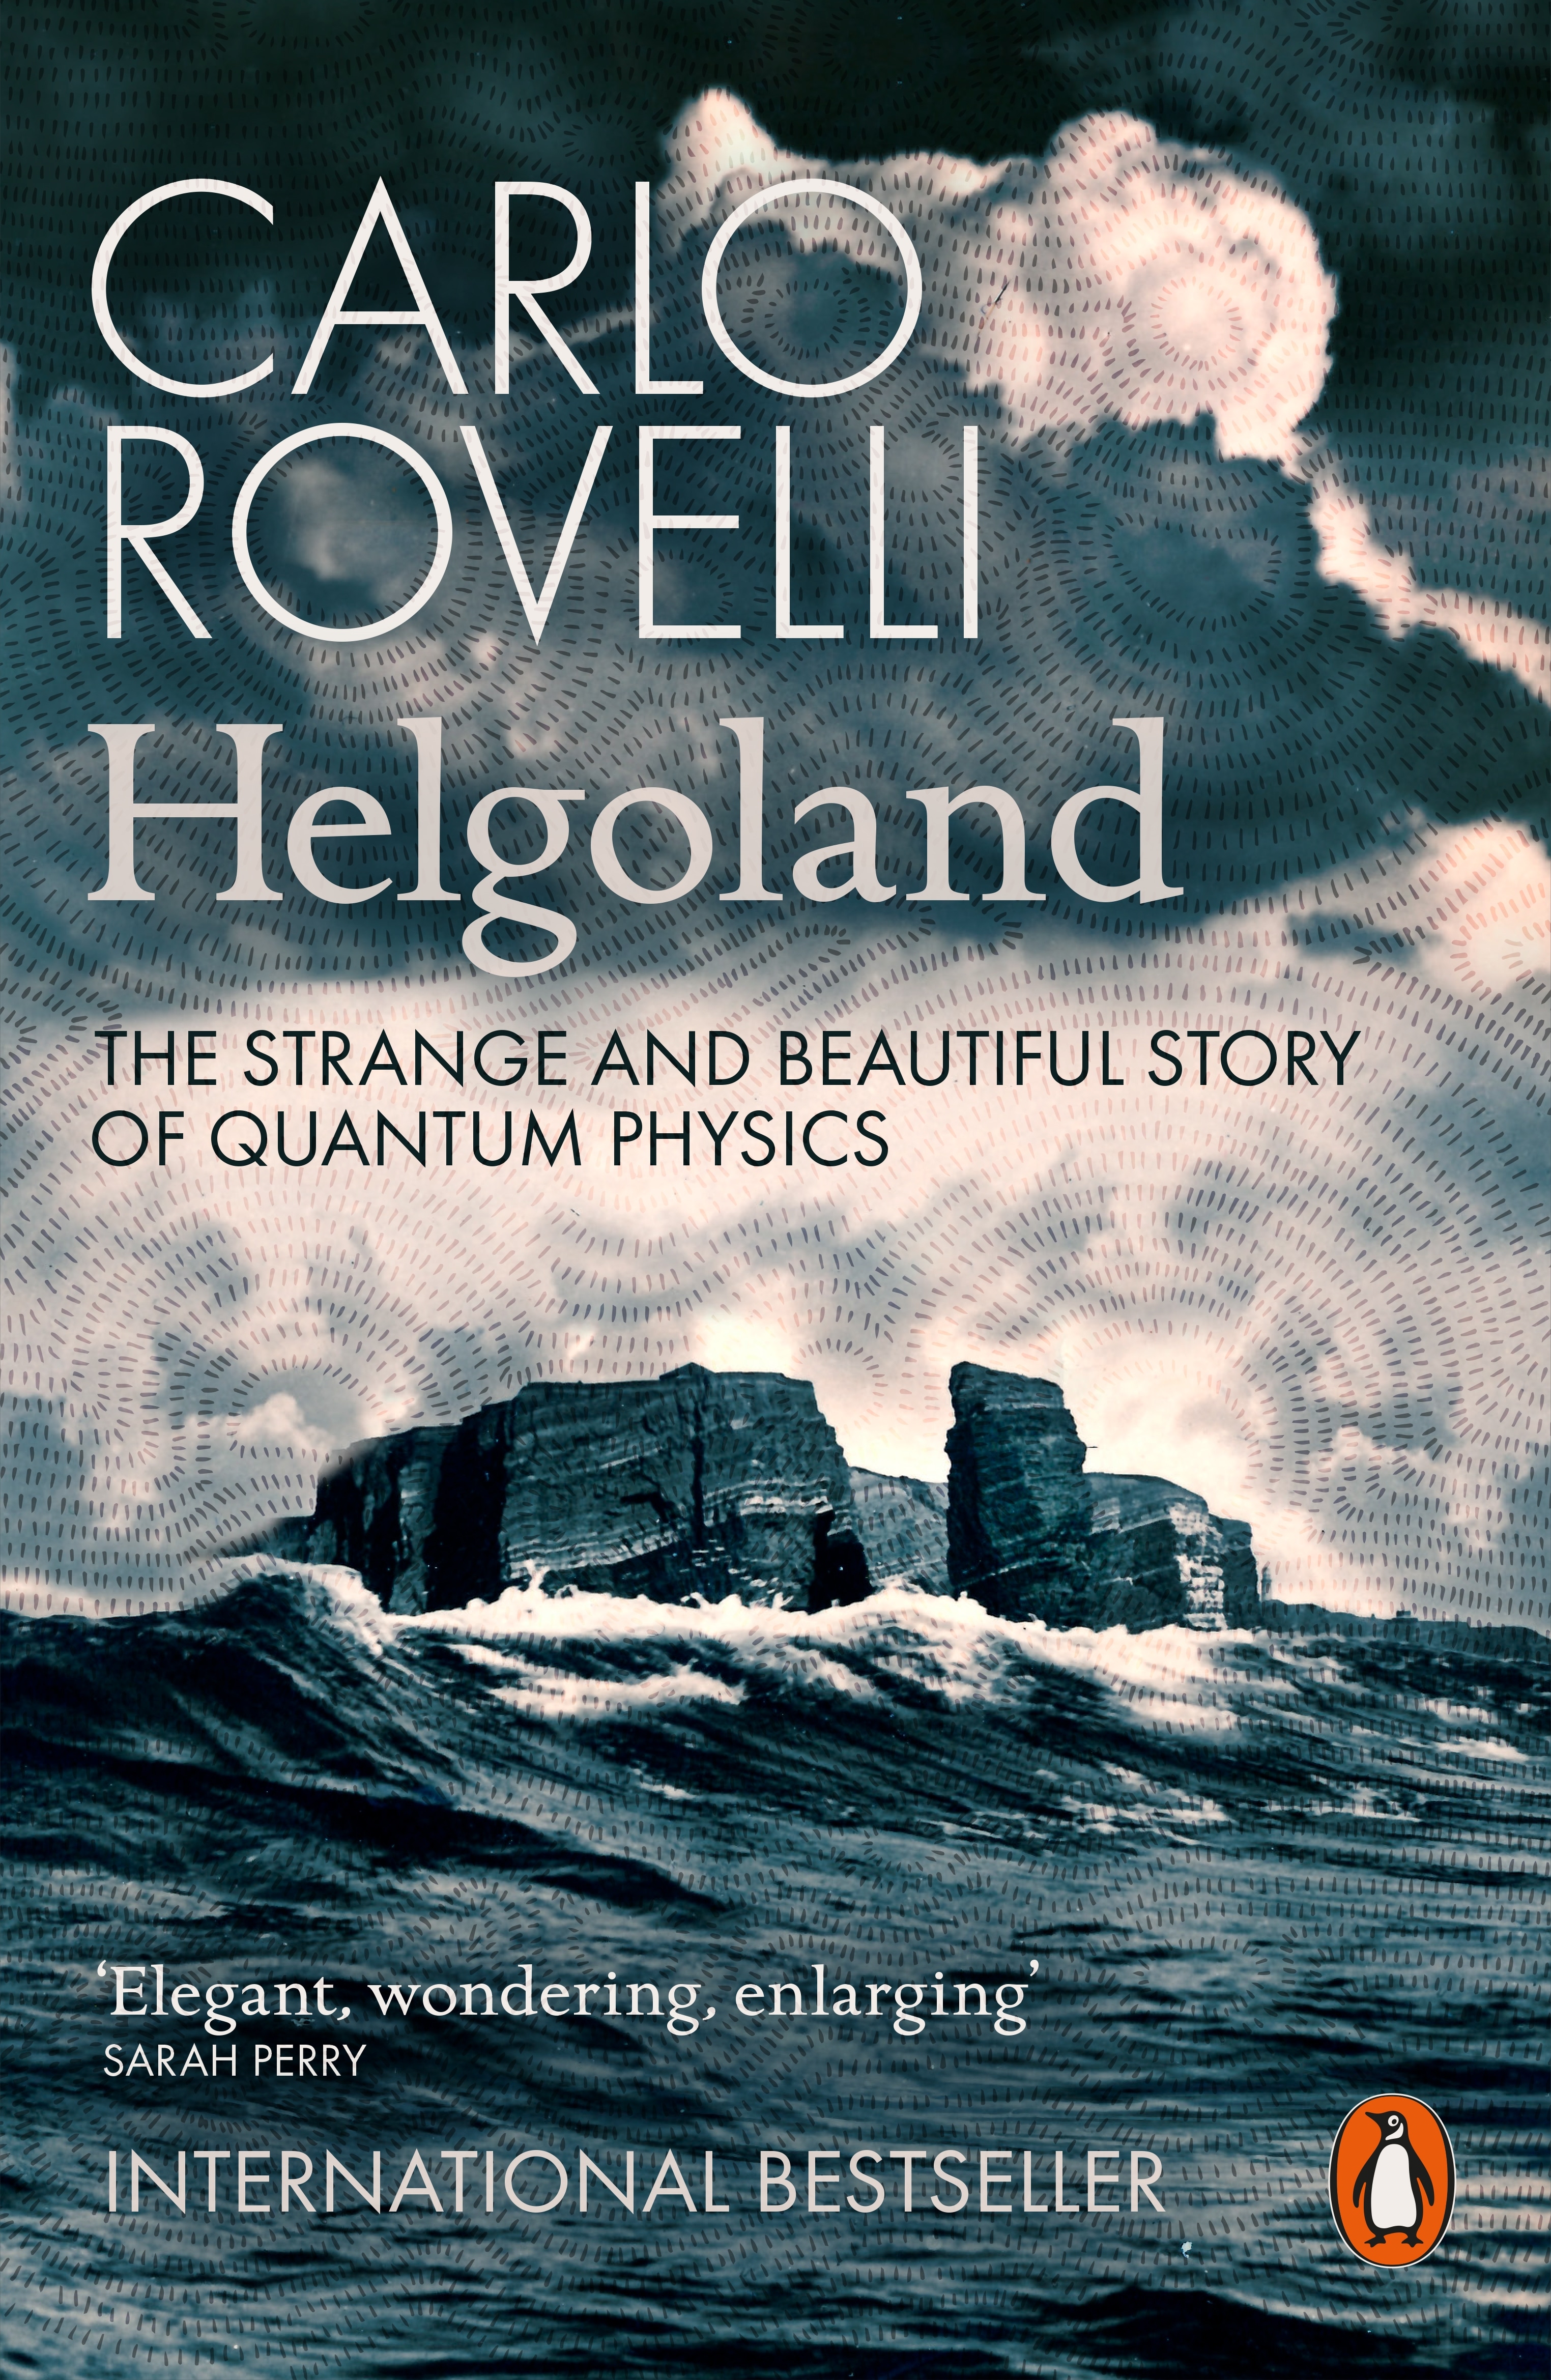 Book “Helgoland” by Carlo Rovelli — September 1, 2022